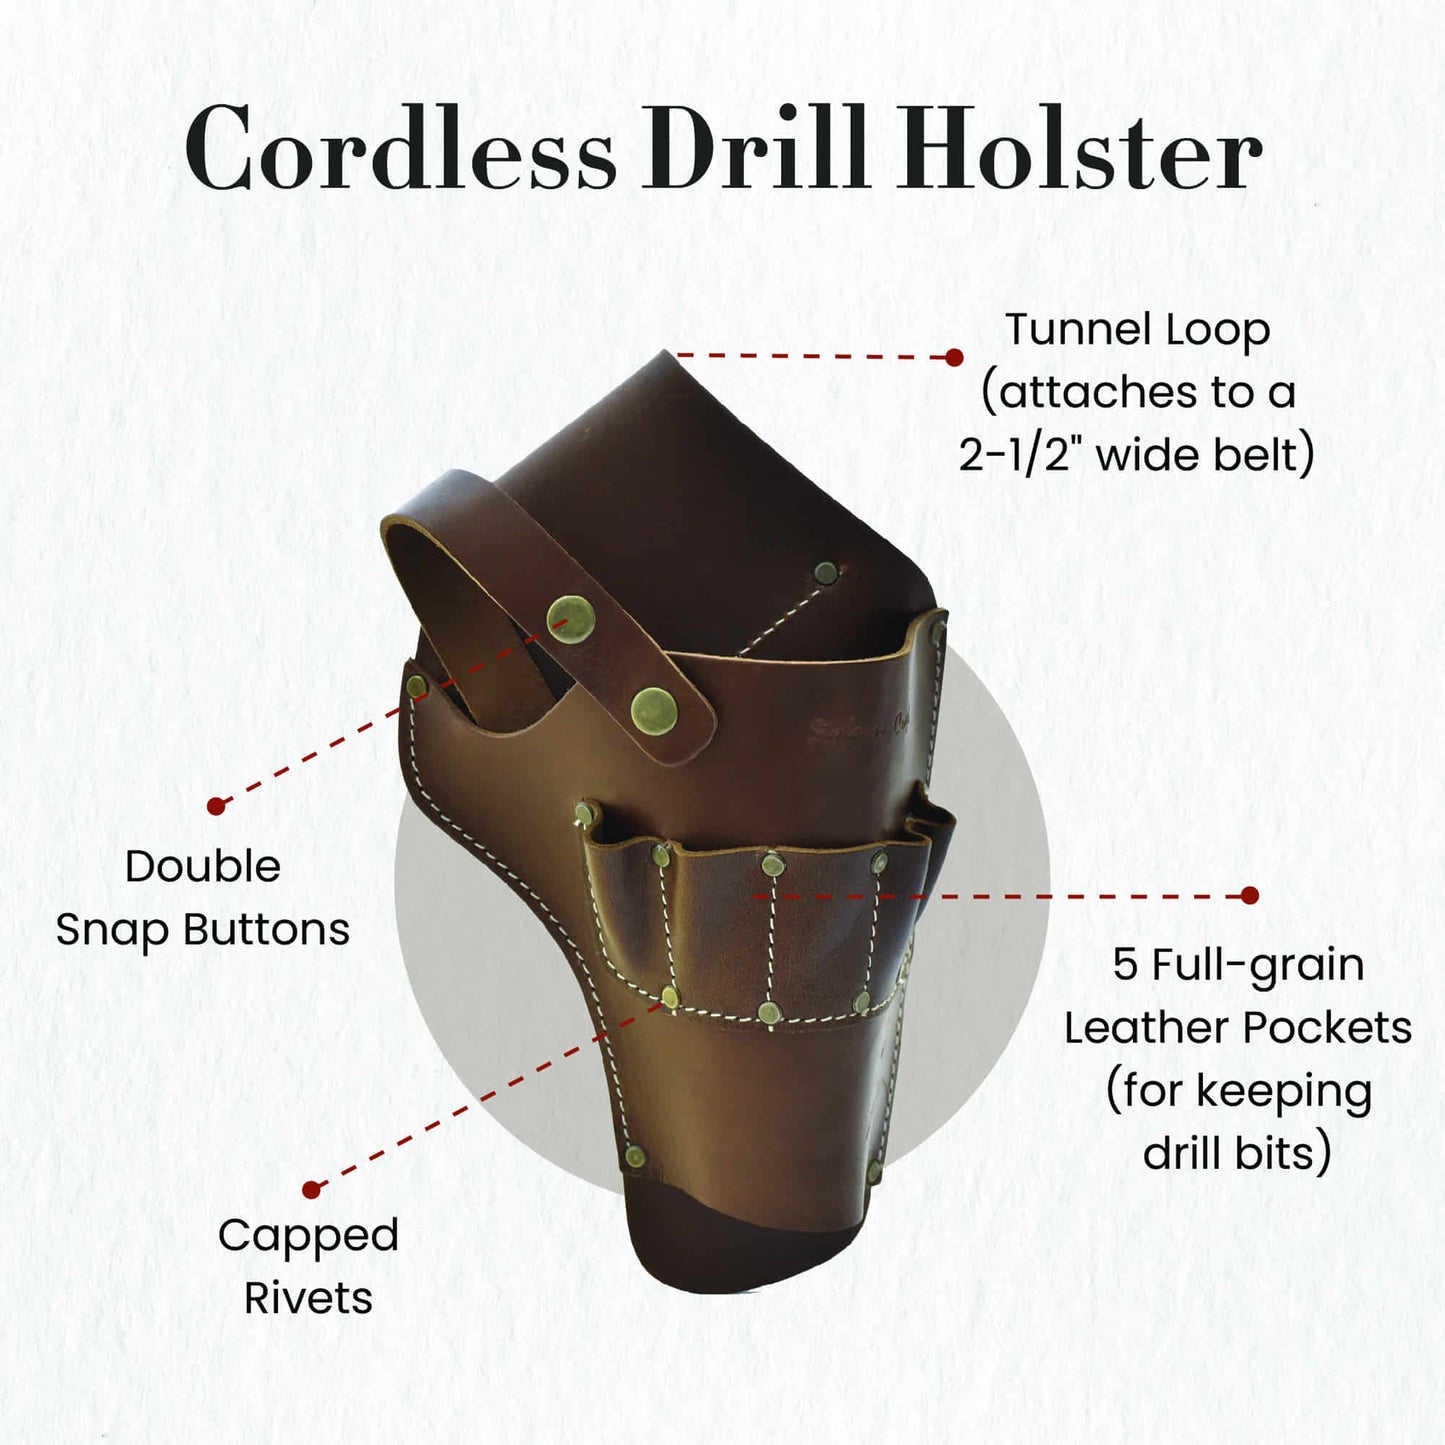 Style n Craft's 98000 - Cordless Drill Holster in Heavy Top Grain Leather with 5 Drill Bit Pockets & Double Snap Button Leather Strap for Adjustment - Front view showing details